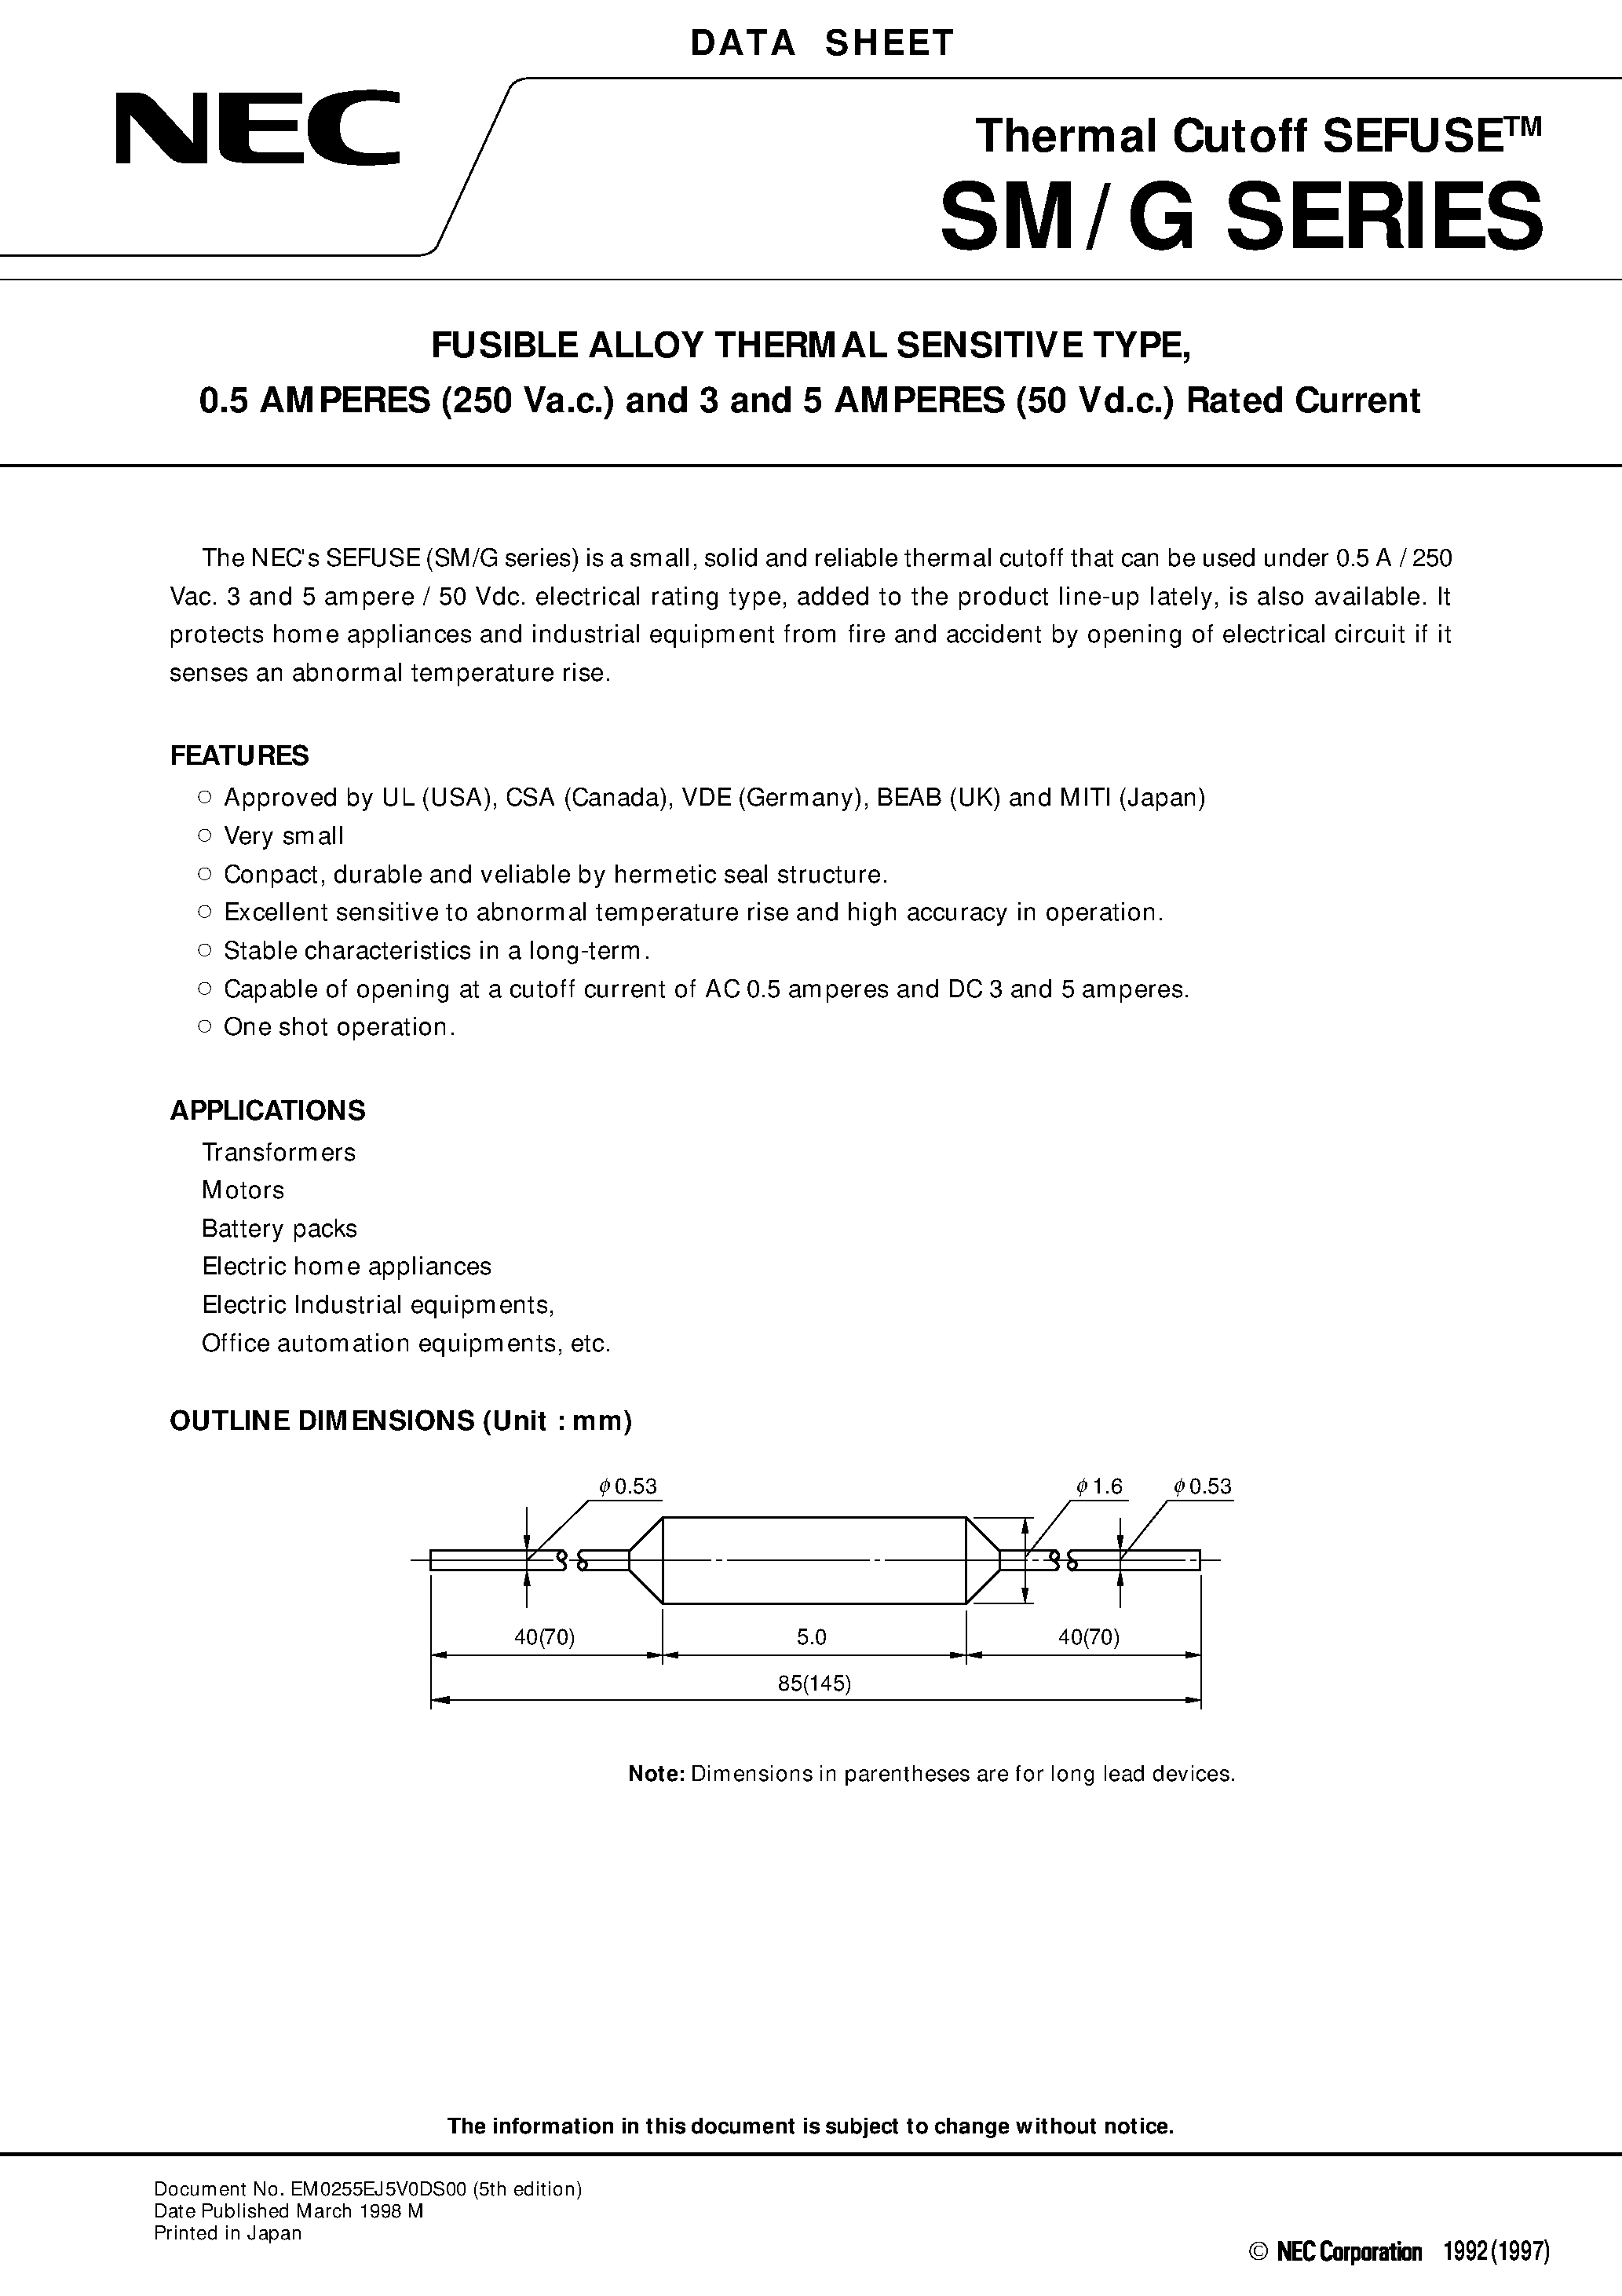 Datasheet SM110G0 - FUSIBLE ALLOY THERMAL SENSITIVE TYPE/ 0.5 AMPERES 250 Va.c. and 3 and 5 AMPERES 50 Vd.c. Rated Current page 1